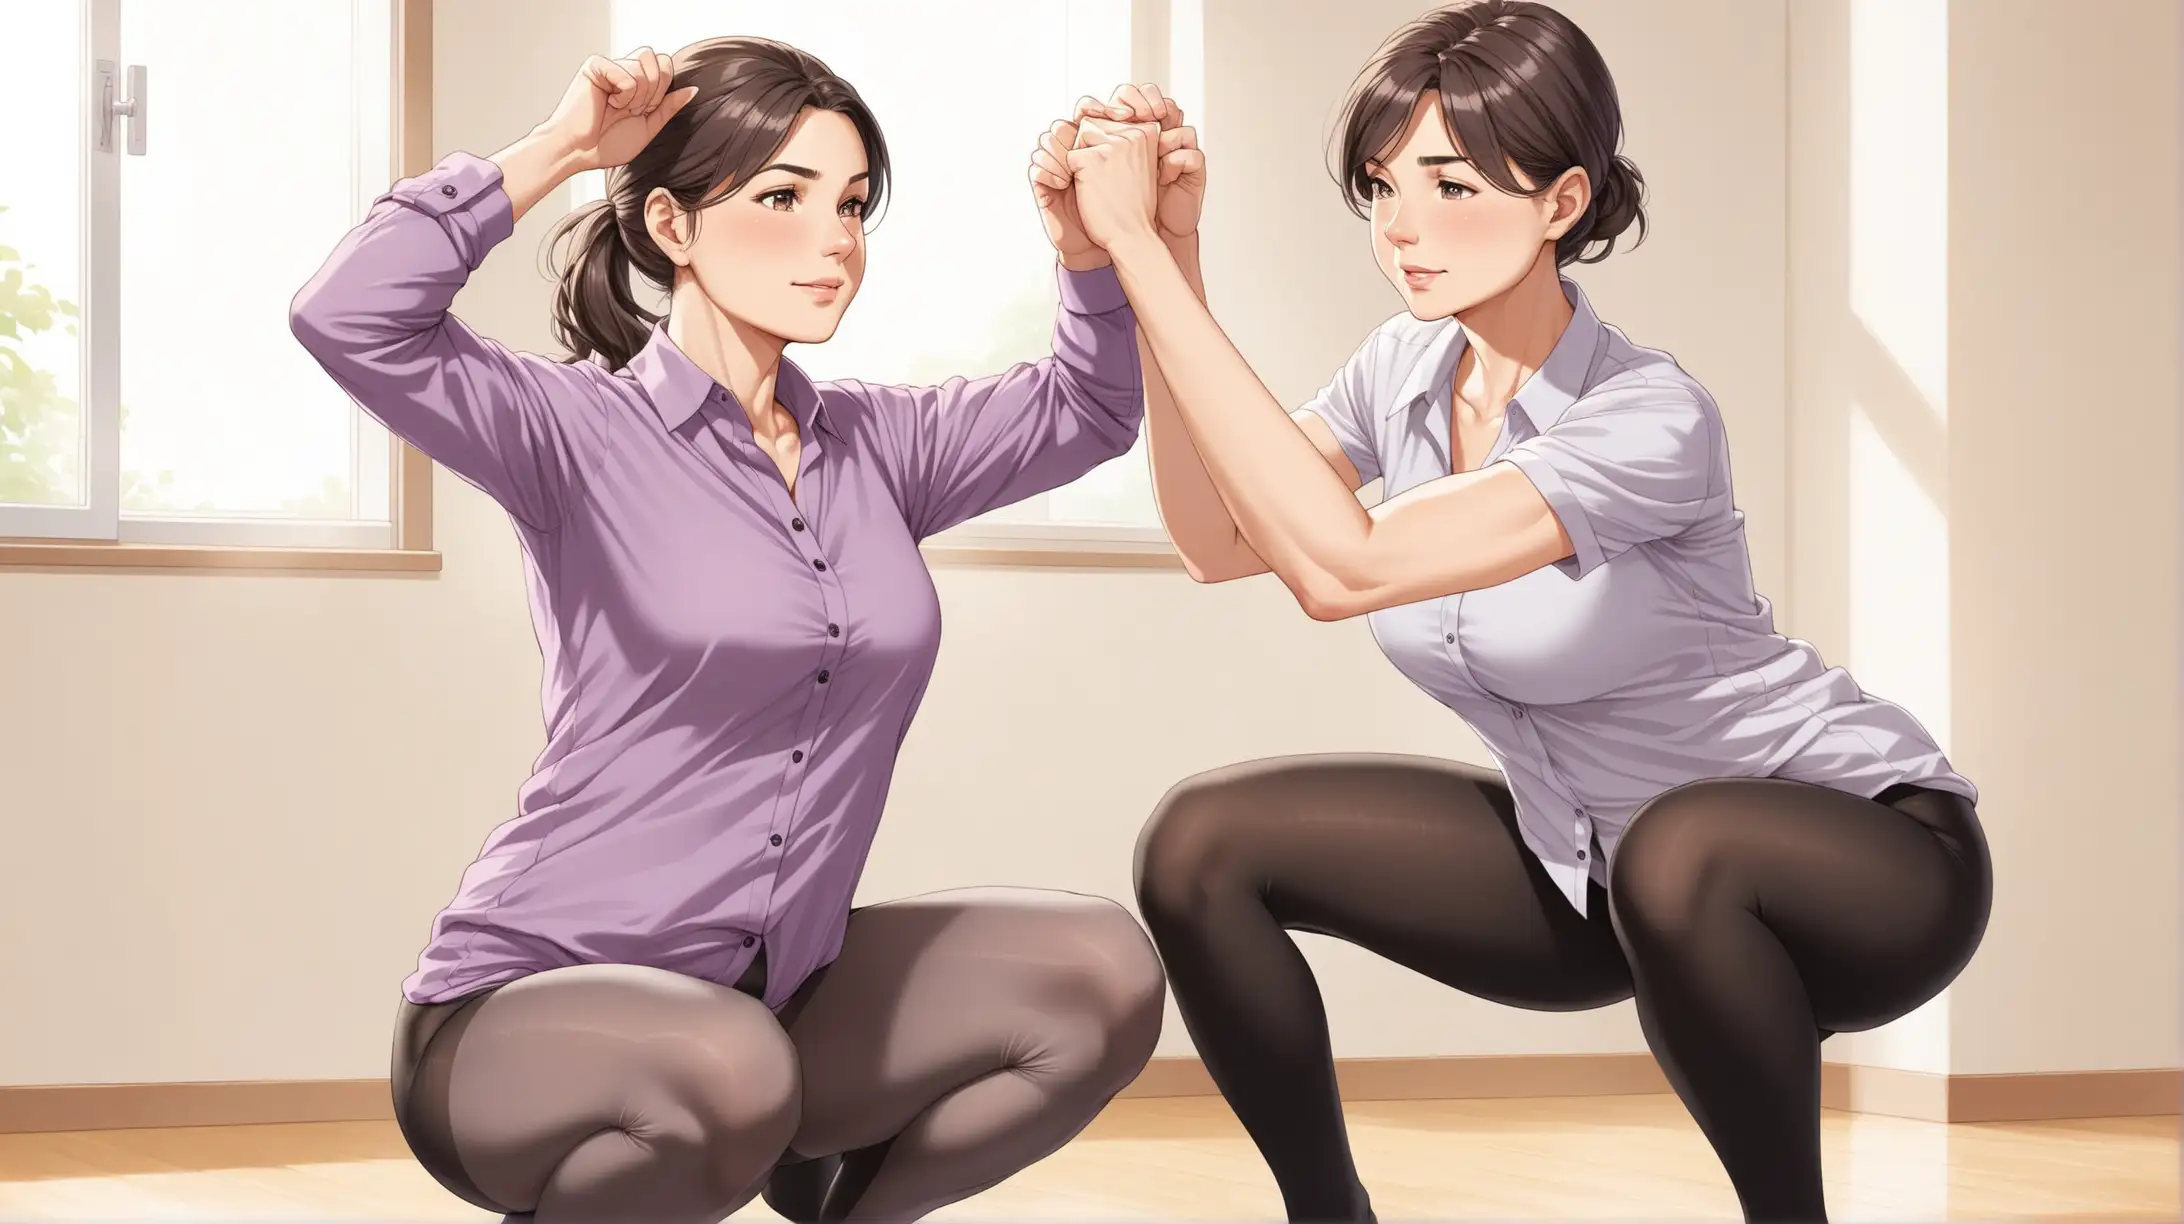 Mature, Gray/Brunette Woman, wearing an untucked, stretch Mauve Button Down shirt, Gray Pantyhose, squats with her 21-year old stepson, who wears her black tights and an untucked white Button Down shirt.  They raise arms as they exercise, she gently pokes his tummy.